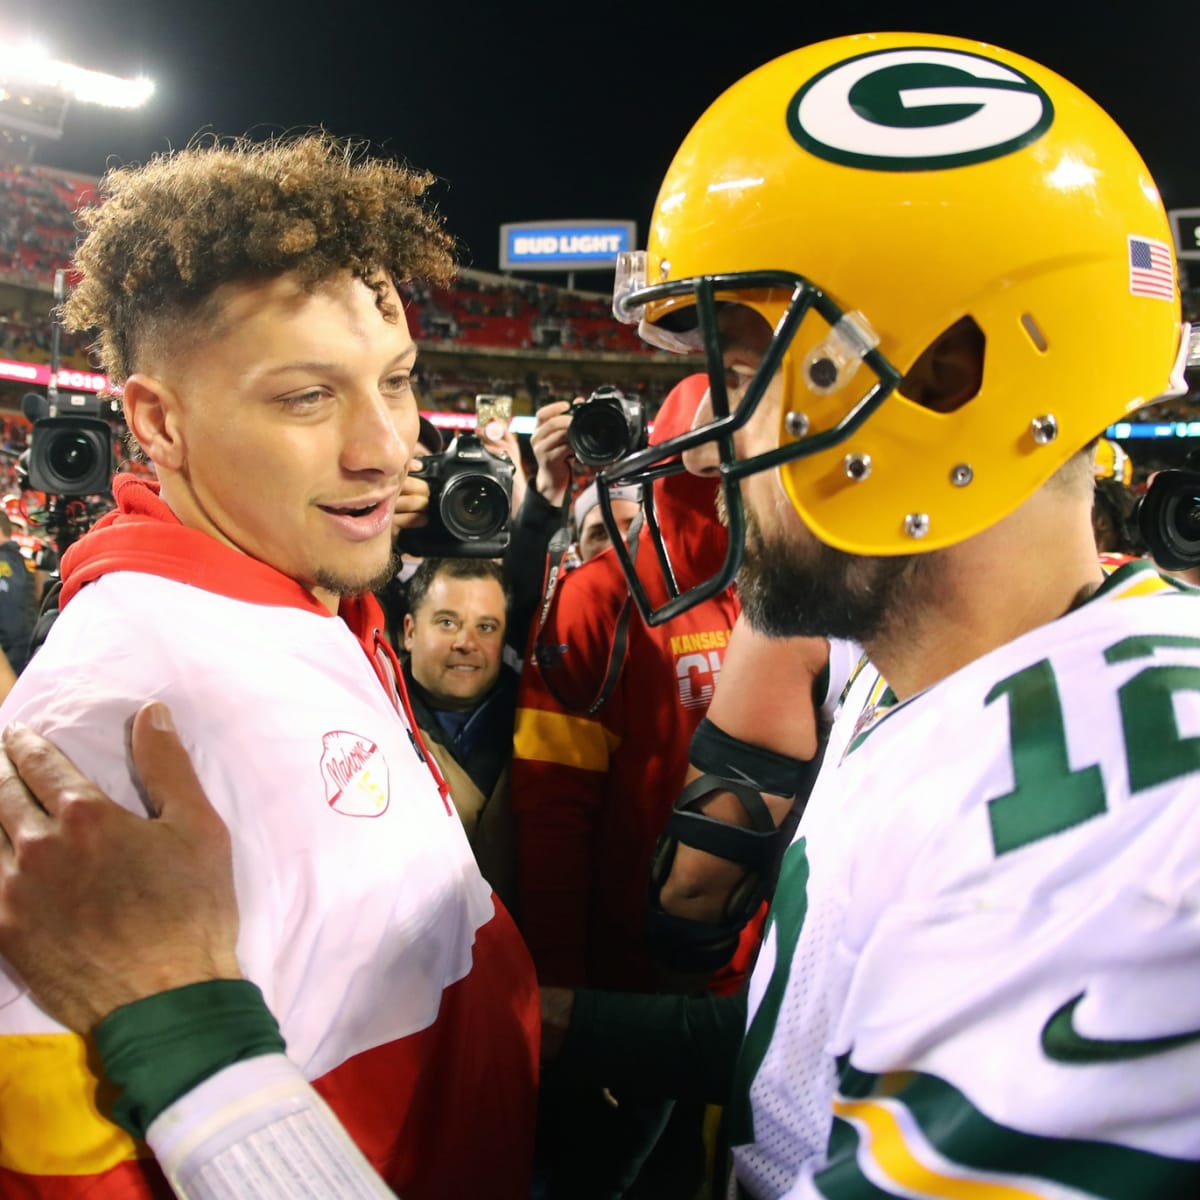 Chiefs, Packers to have NFL preseason games on St. Louis TV